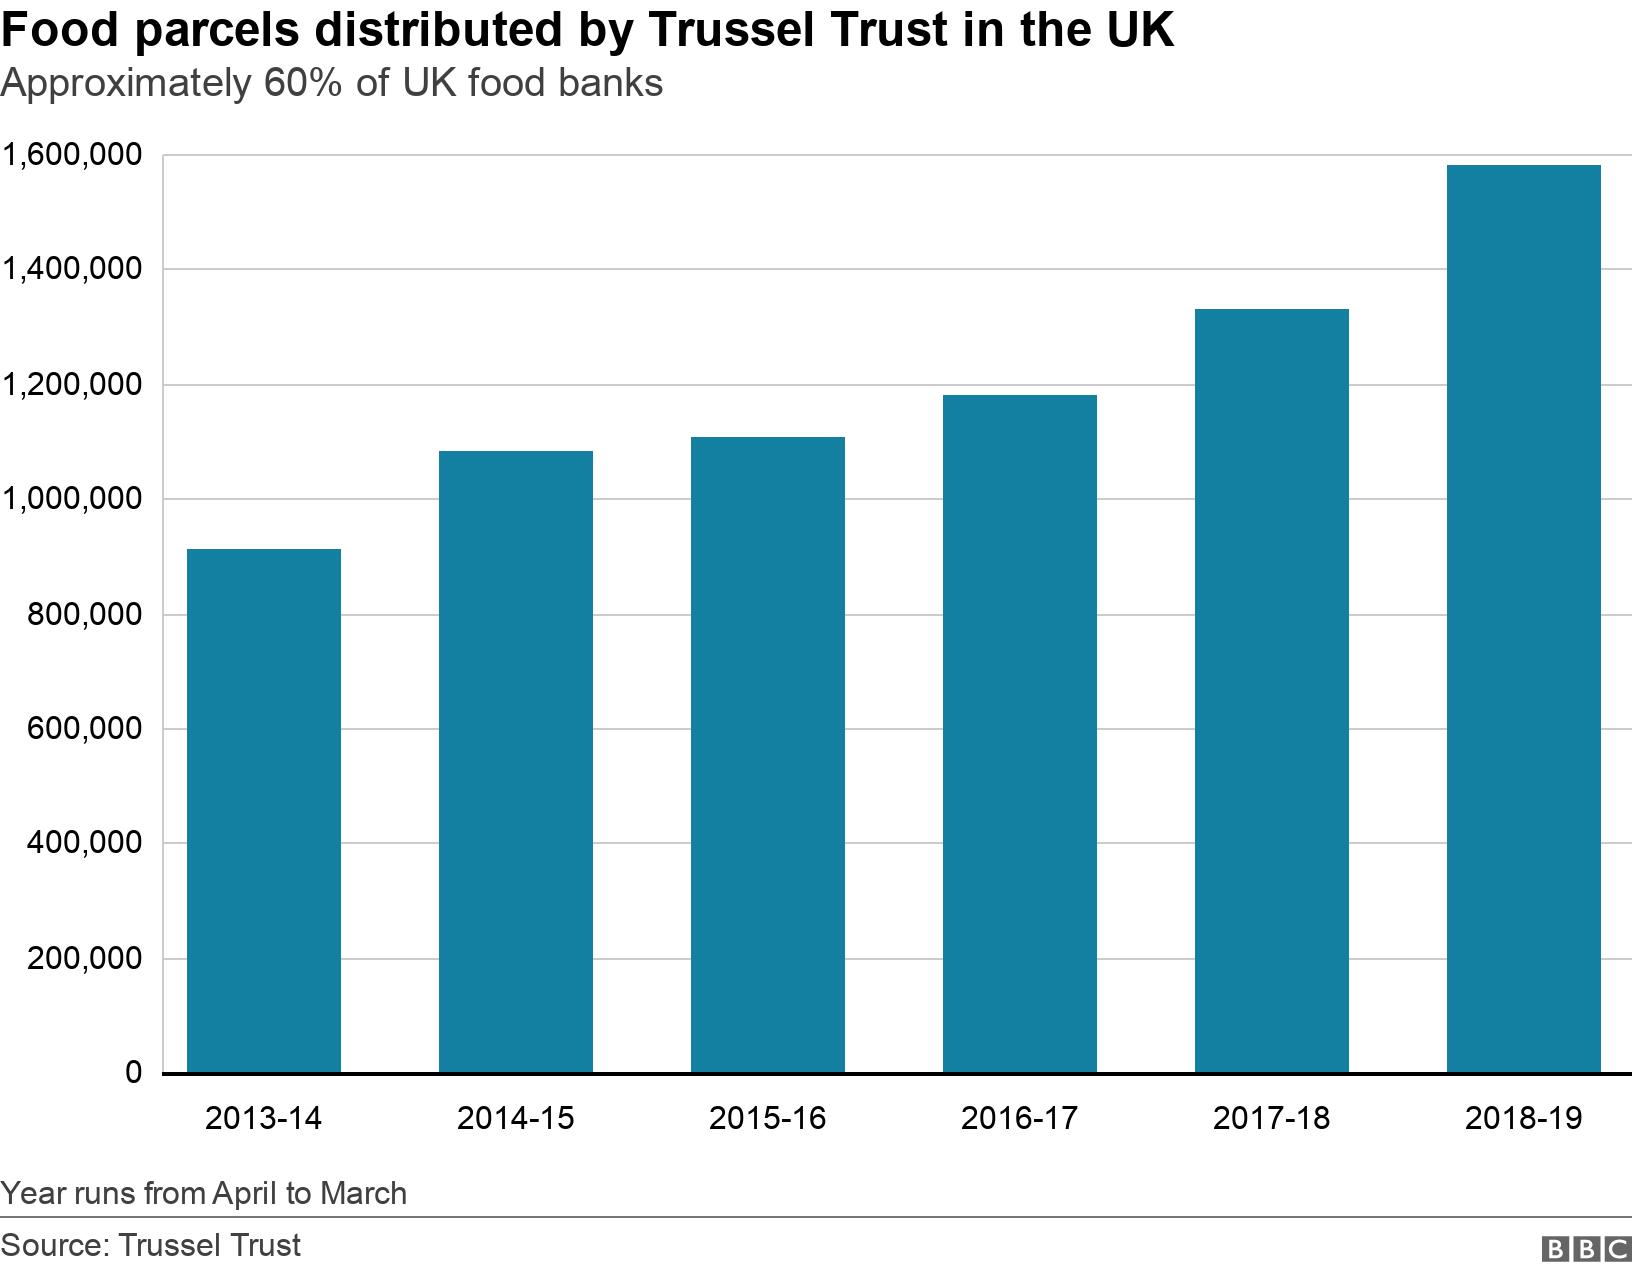 Food parcels distributed by Trussel Trust in the UK. Approximately 60% of UK food banks. This chart shows an upward trend from 2013 to 2019 of food parcel distribution going up from 913,138 to 1,583,668 Year runs from April to March.